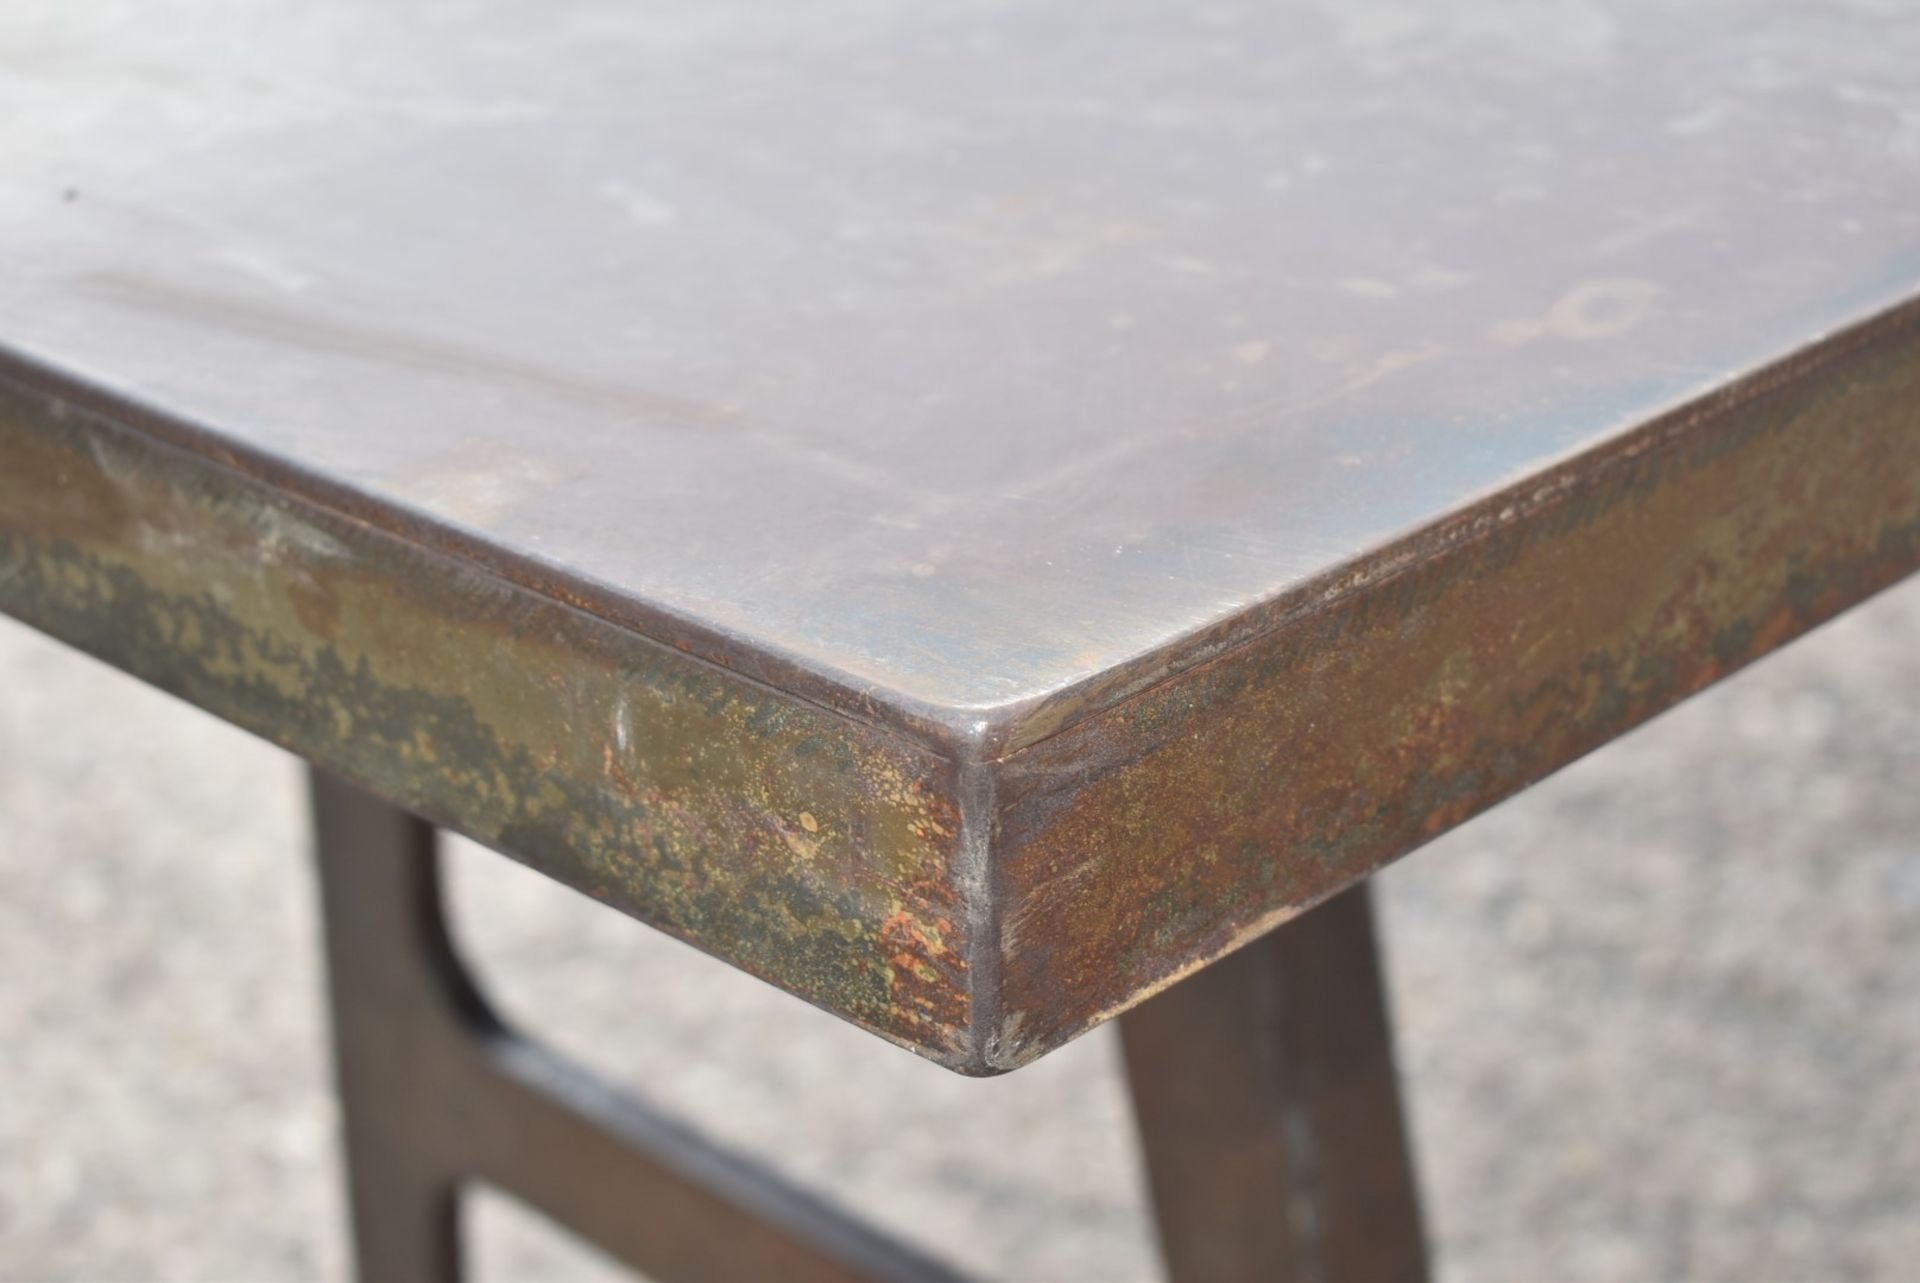 1 x Industrial Style 200cm Banquetting Restaurant Table Featuring a Heavy Steel Top & Steel Legs - Image 4 of 23